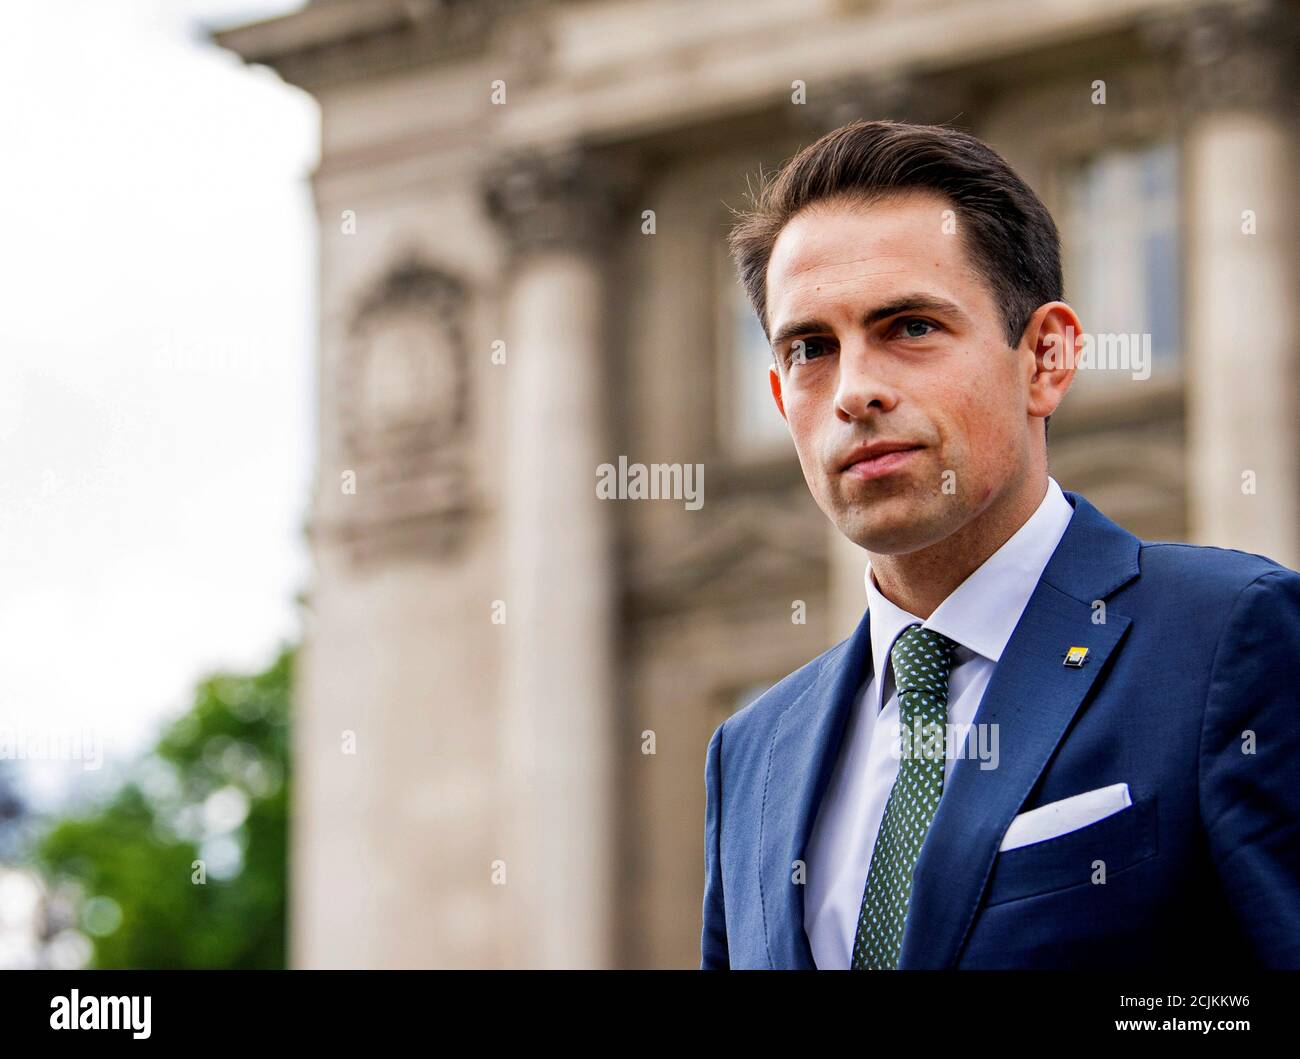 Tom Van Grieken, President of the far-right Flemish separatist party Vlaams  Belang leaves after a meeting with Belgium's King Philippe at the Royal  Palace in Brussels, Belgium May 29, 2019. REUTERS/Piroschka van